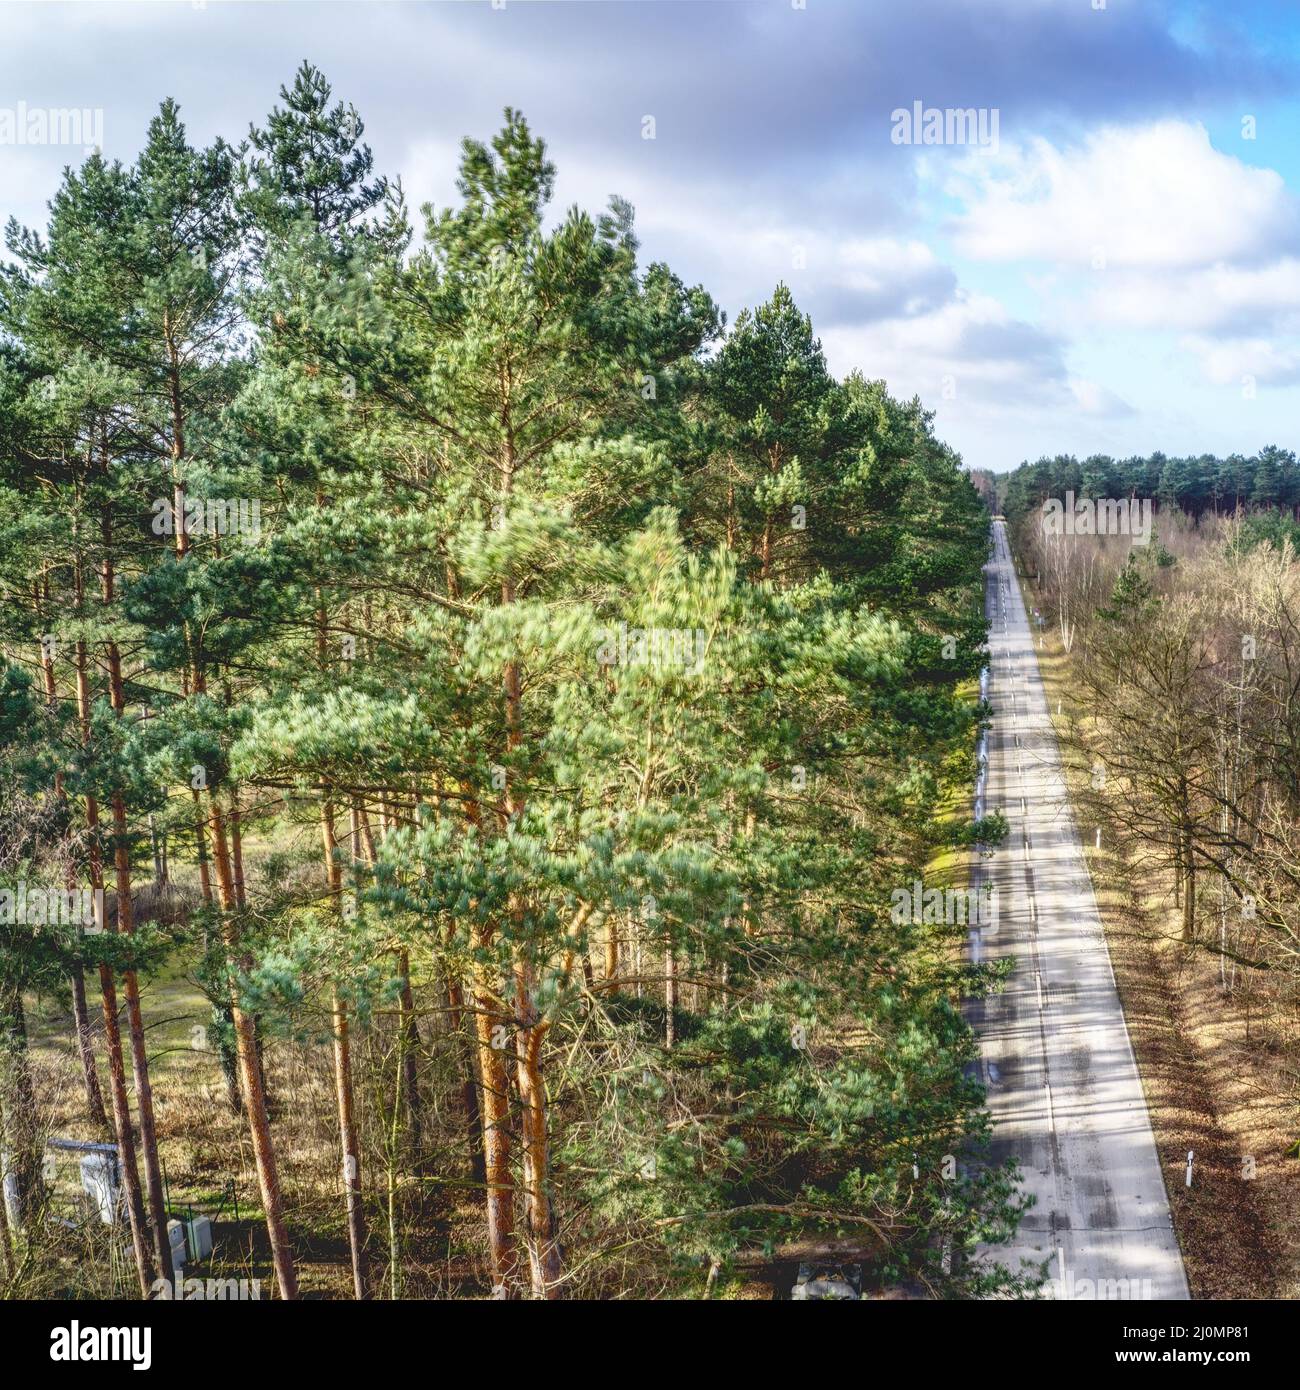 Aerial view of a dead straight road through a forest area with tall pine trees in the foreground Stock Photo